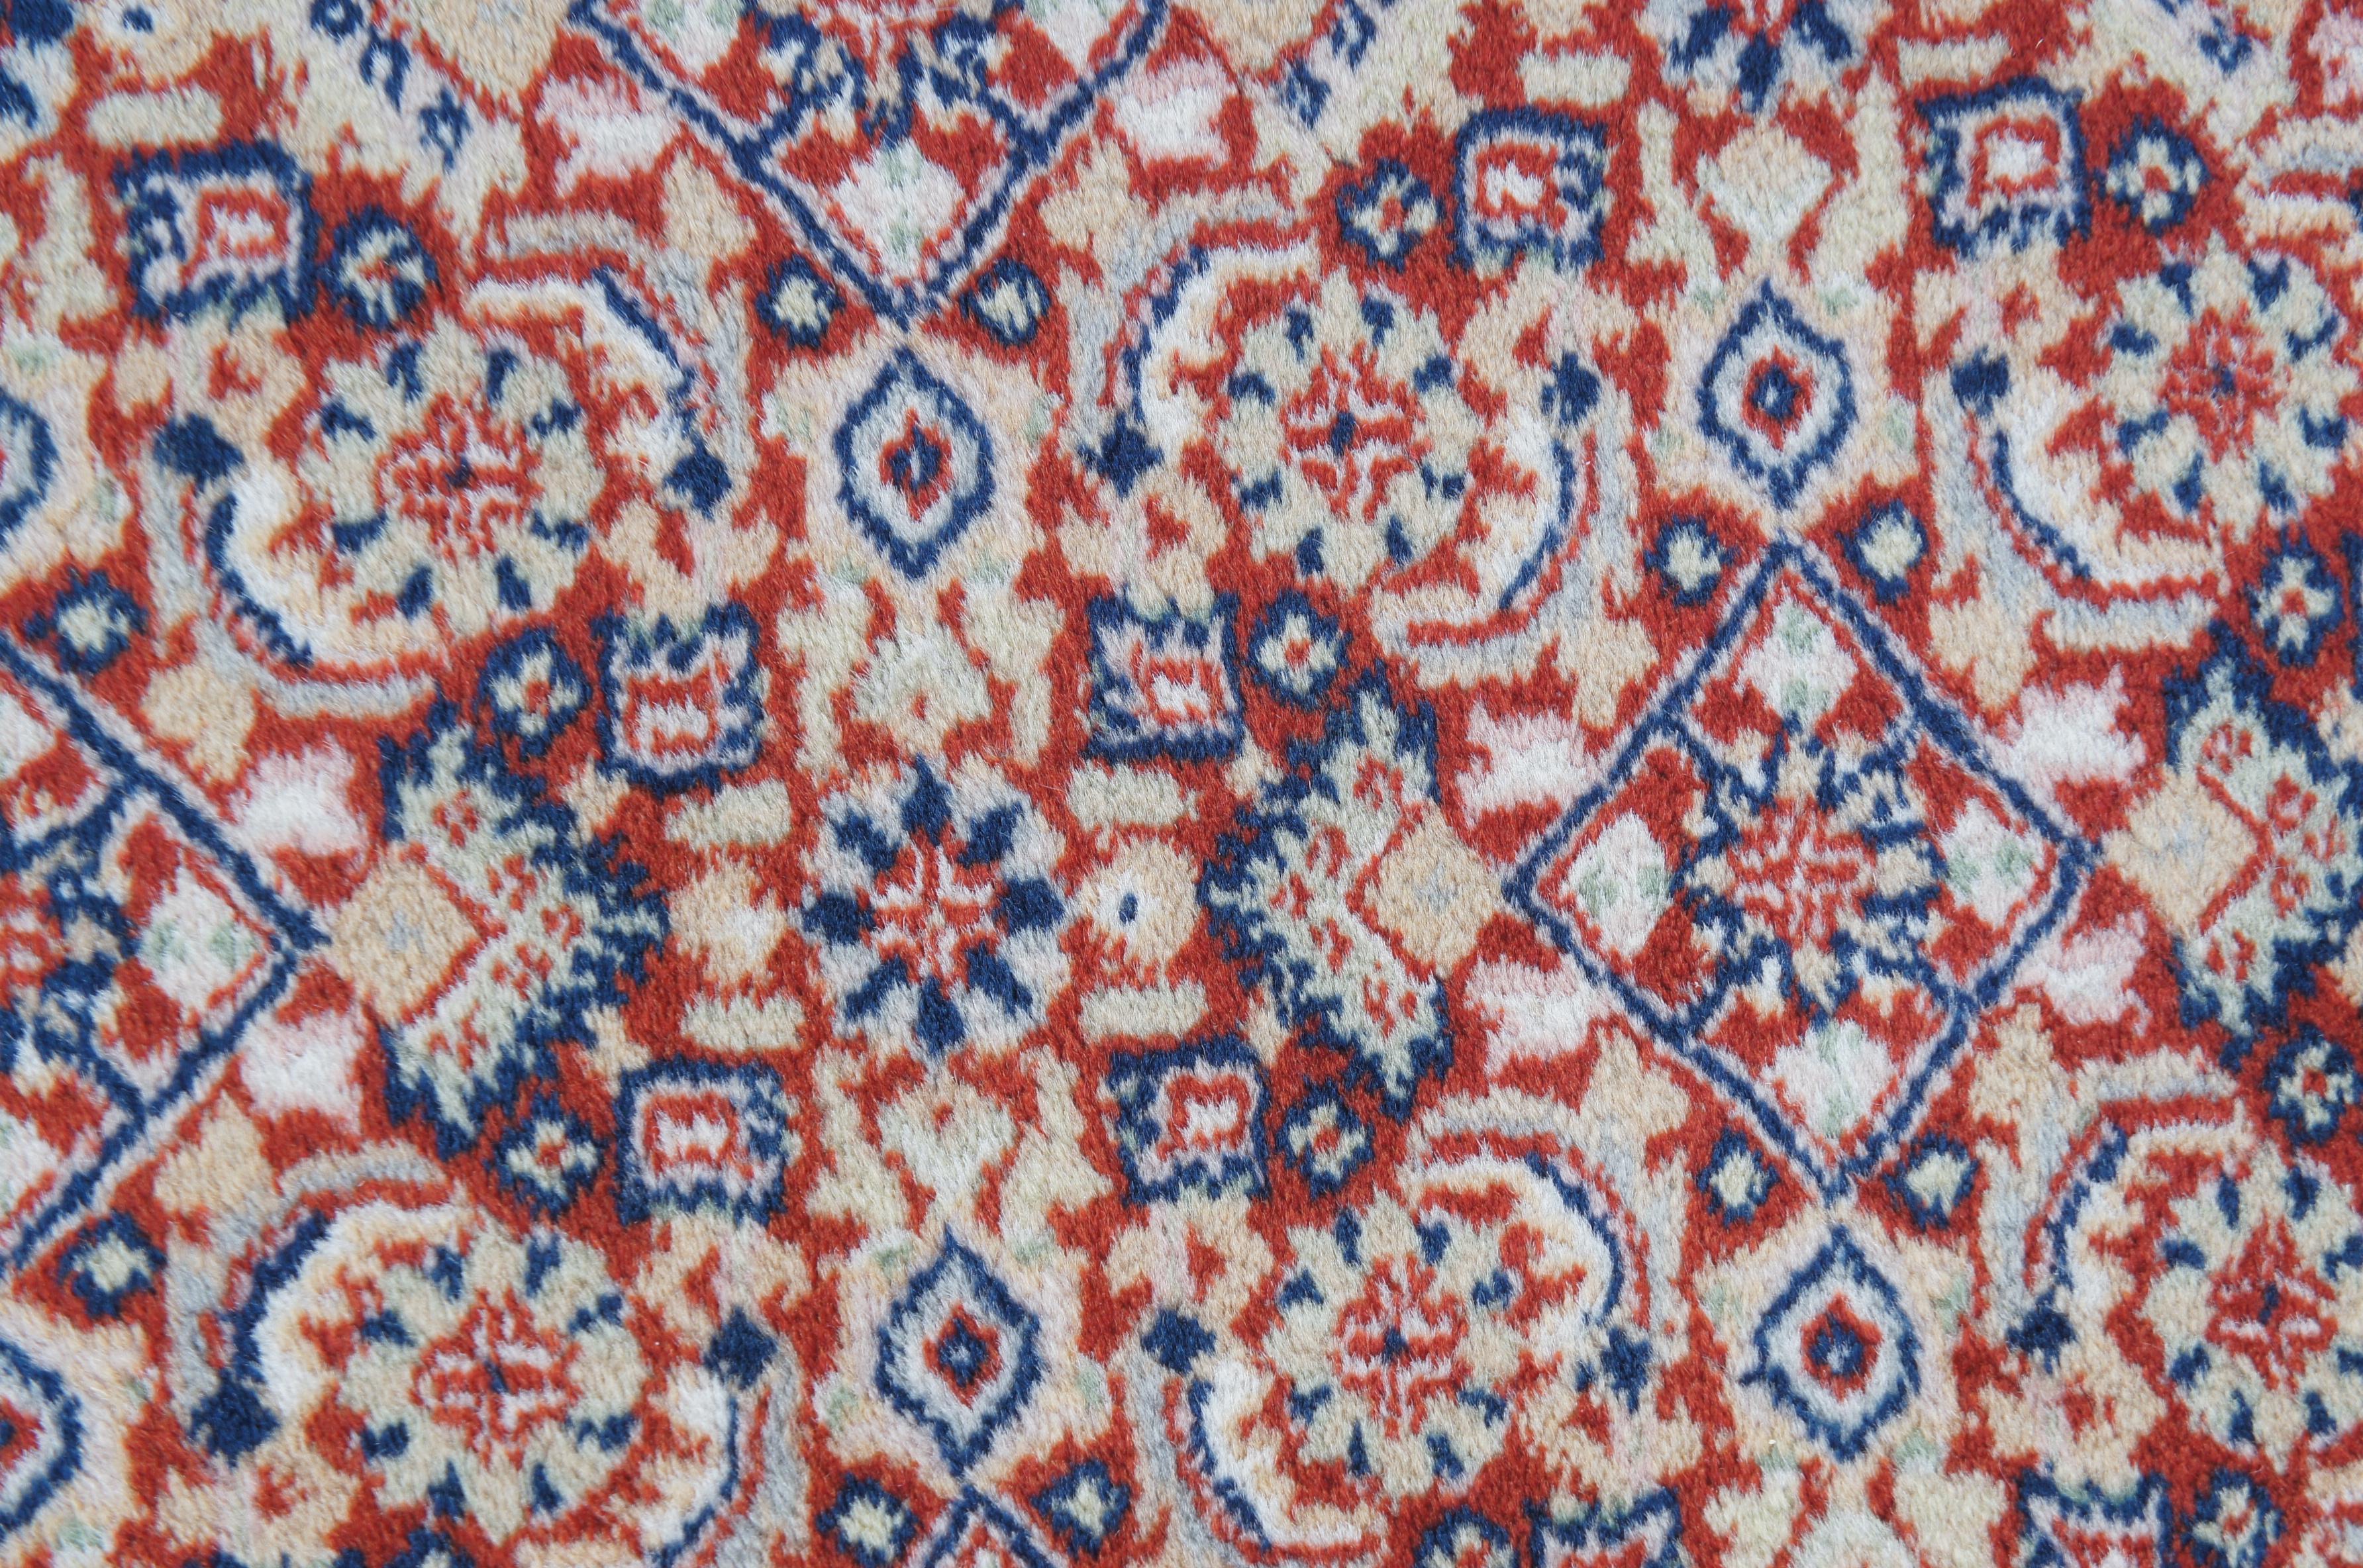 Vintage Indo-Tabriz Hand Knotted Wool Red & Blue Runner Rug 2.5' x 8' For Sale 5